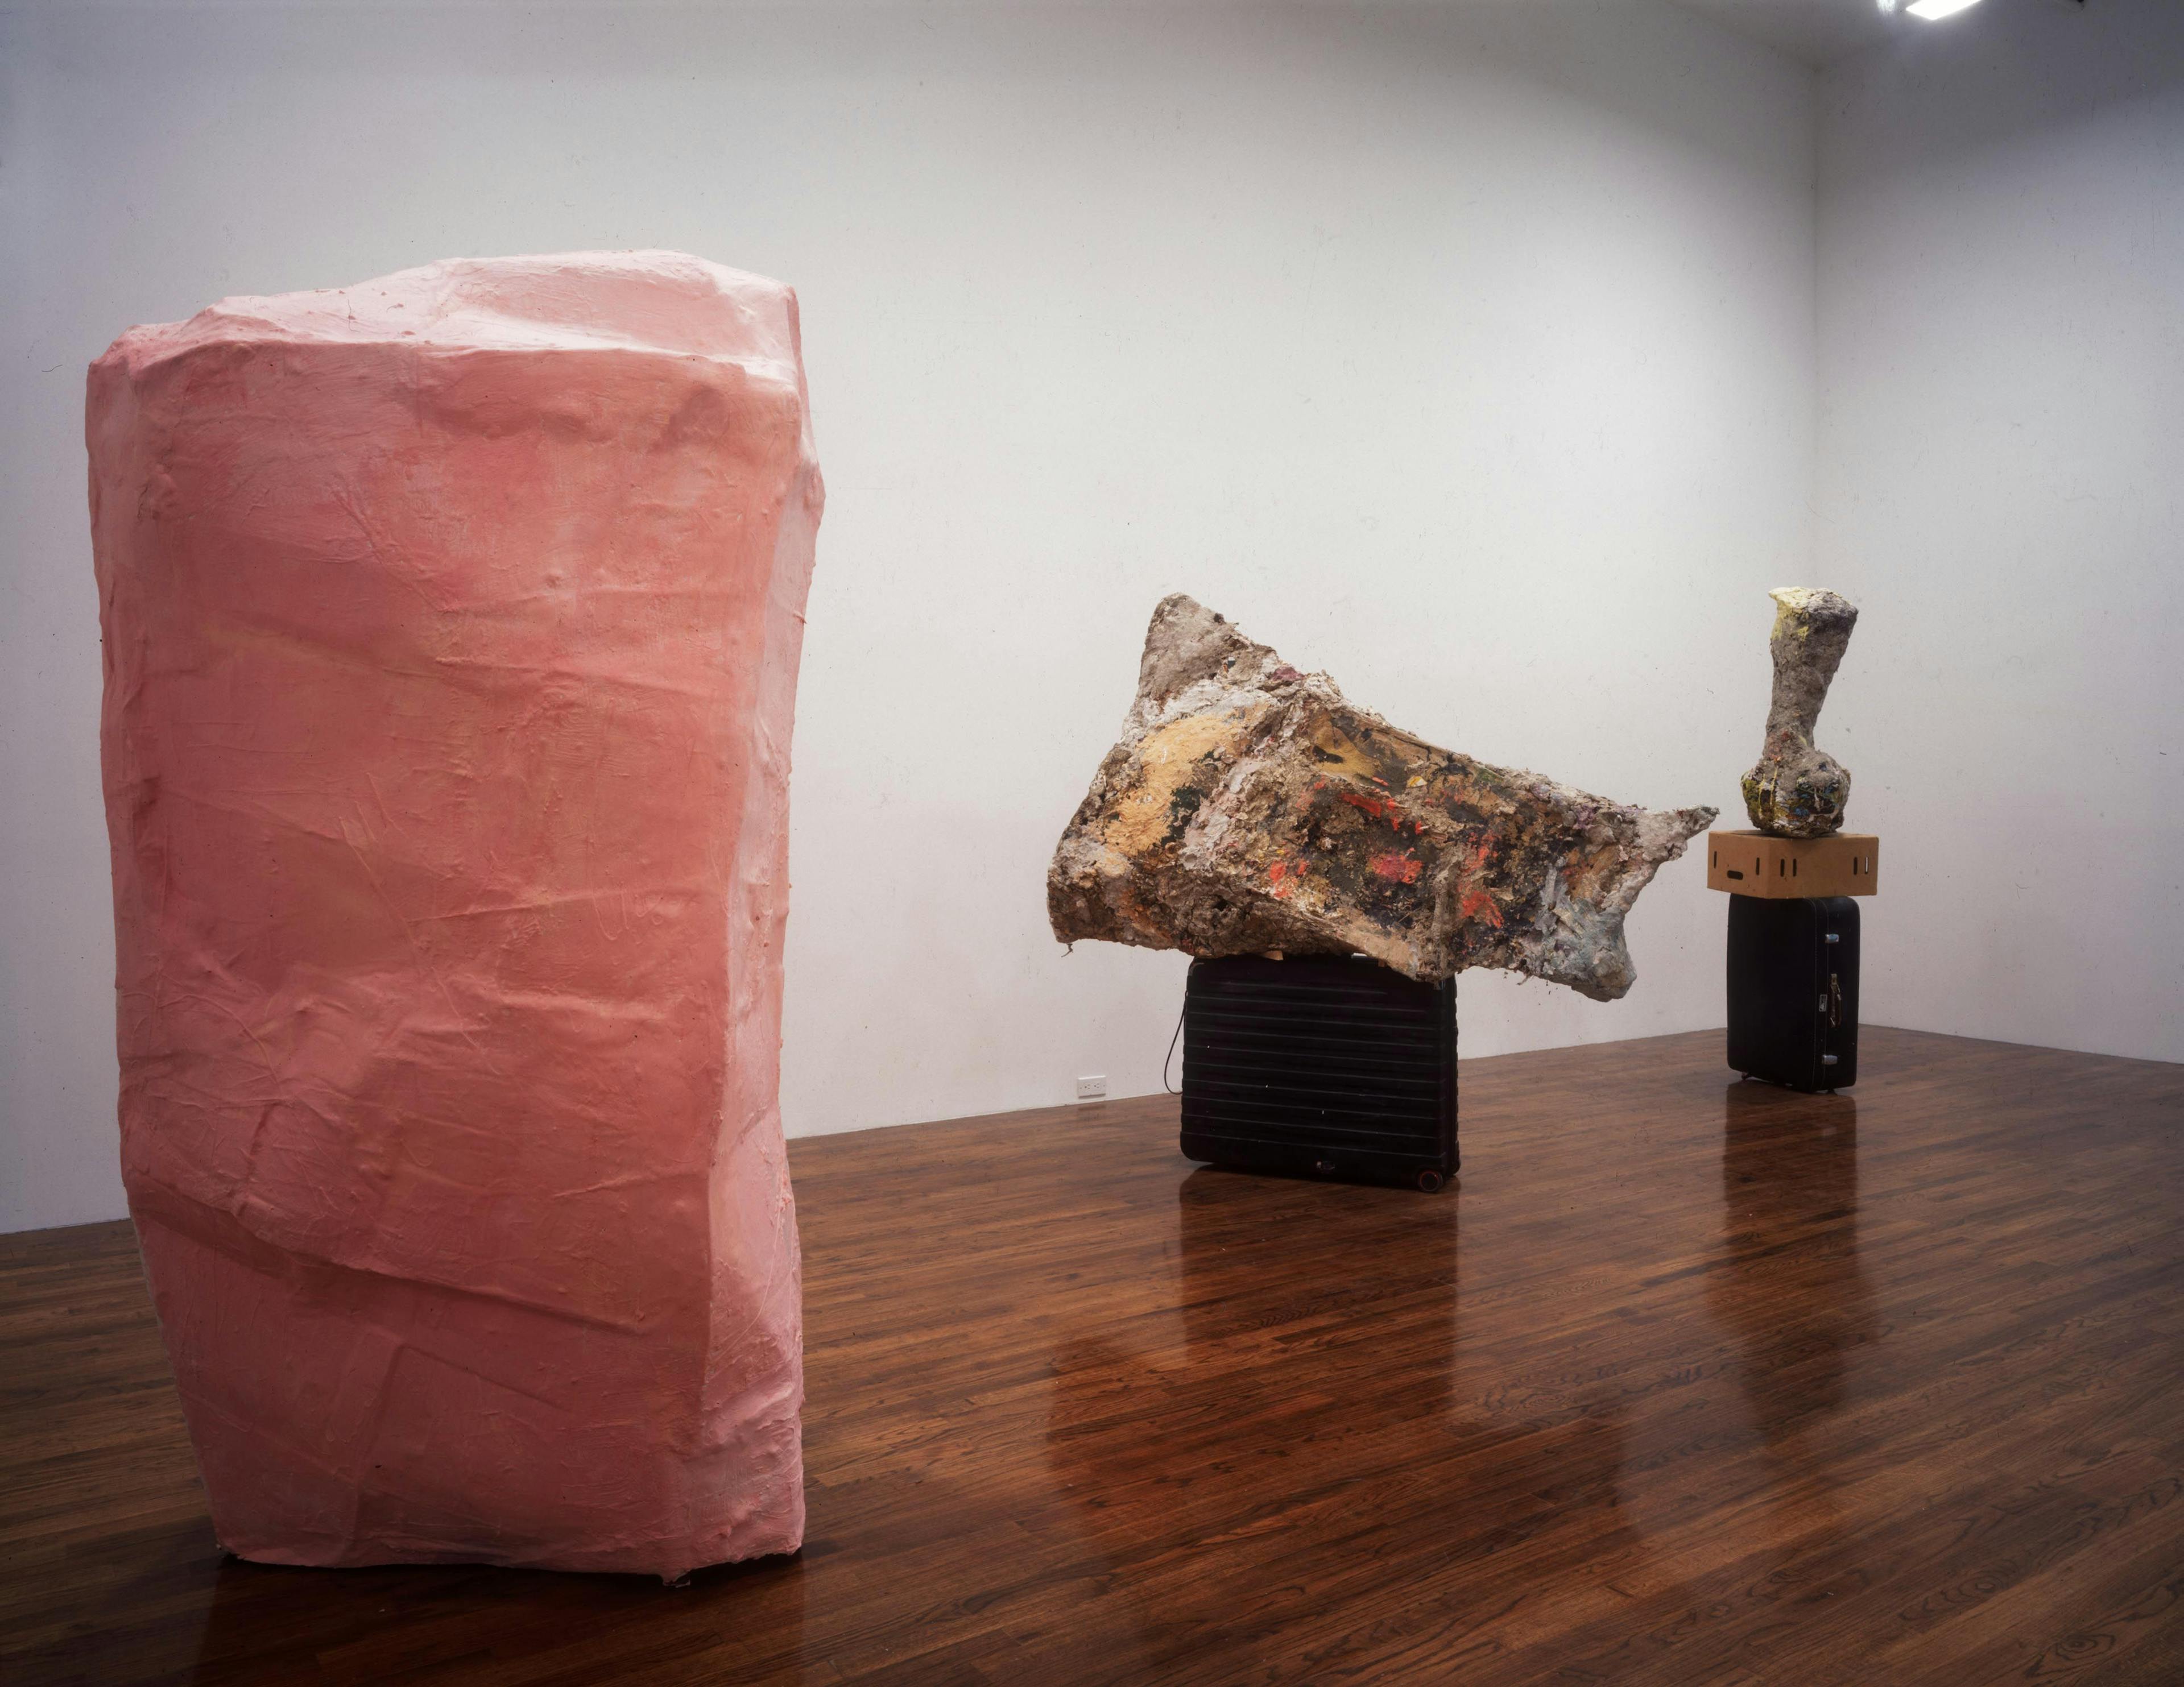 An installation view of the exhibition Franz West: New Sculptures and Installations, at David Zwirner New York, dated 1996.